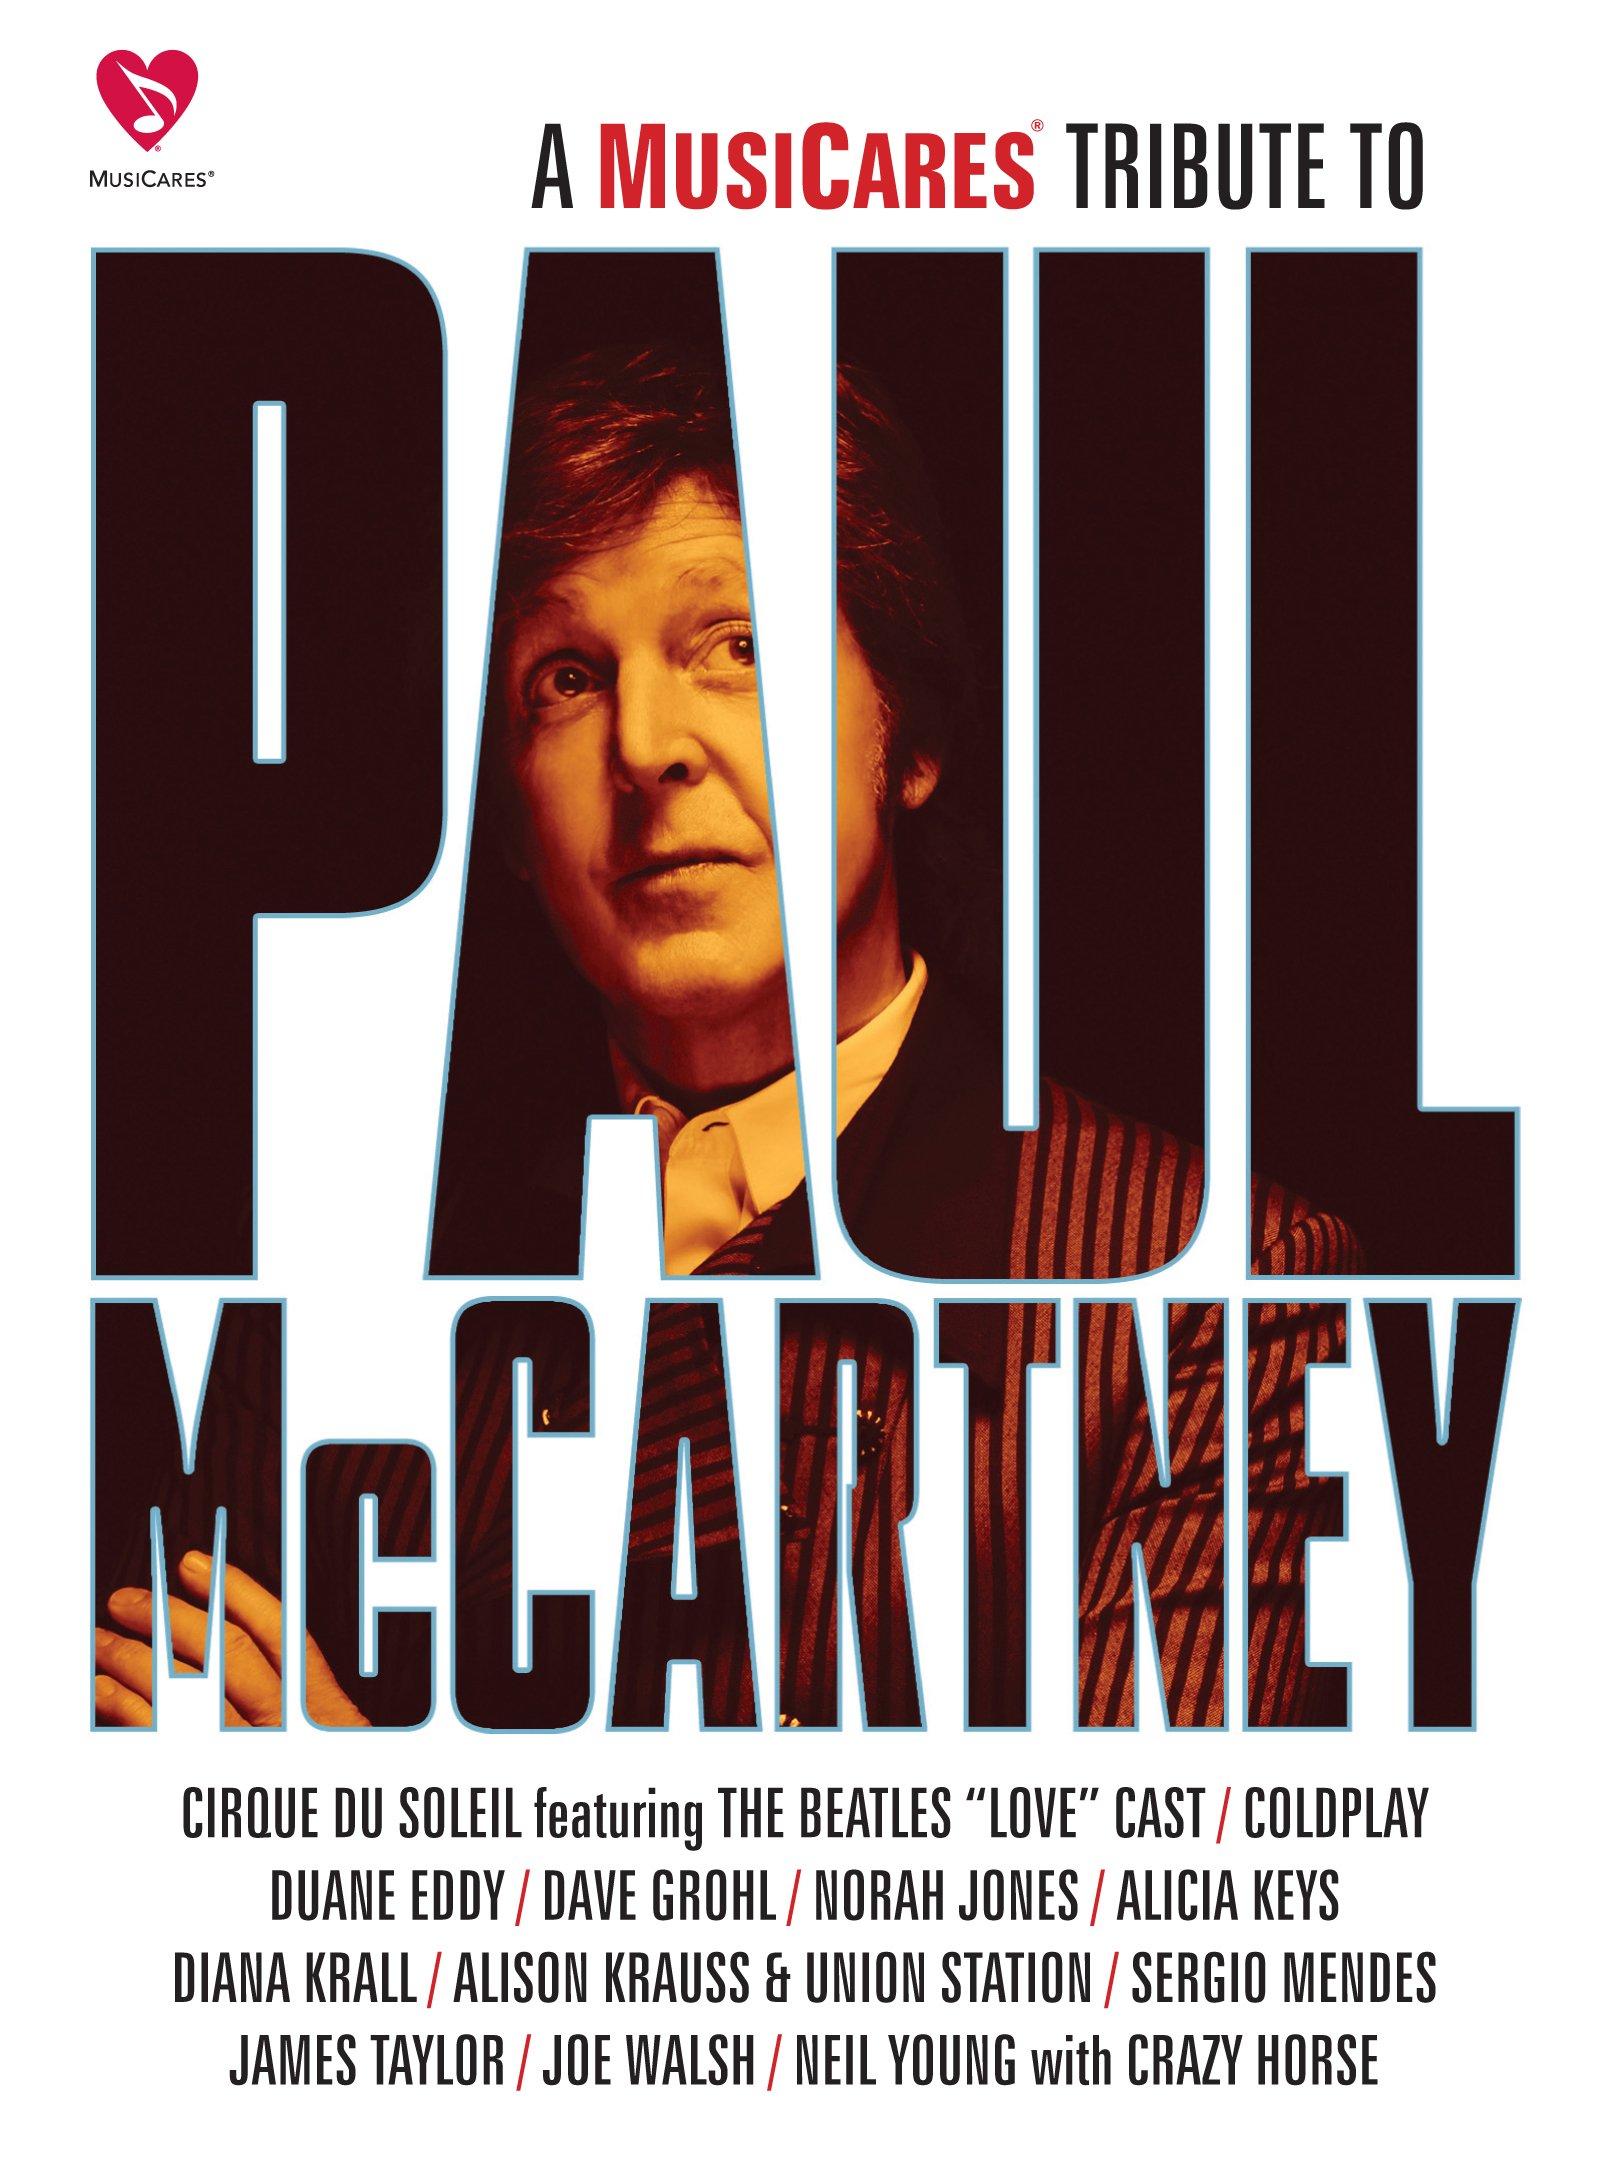 A MusiCares Tribute To Paul McCartney Coming To Blu-ray, DVD GRAMMY